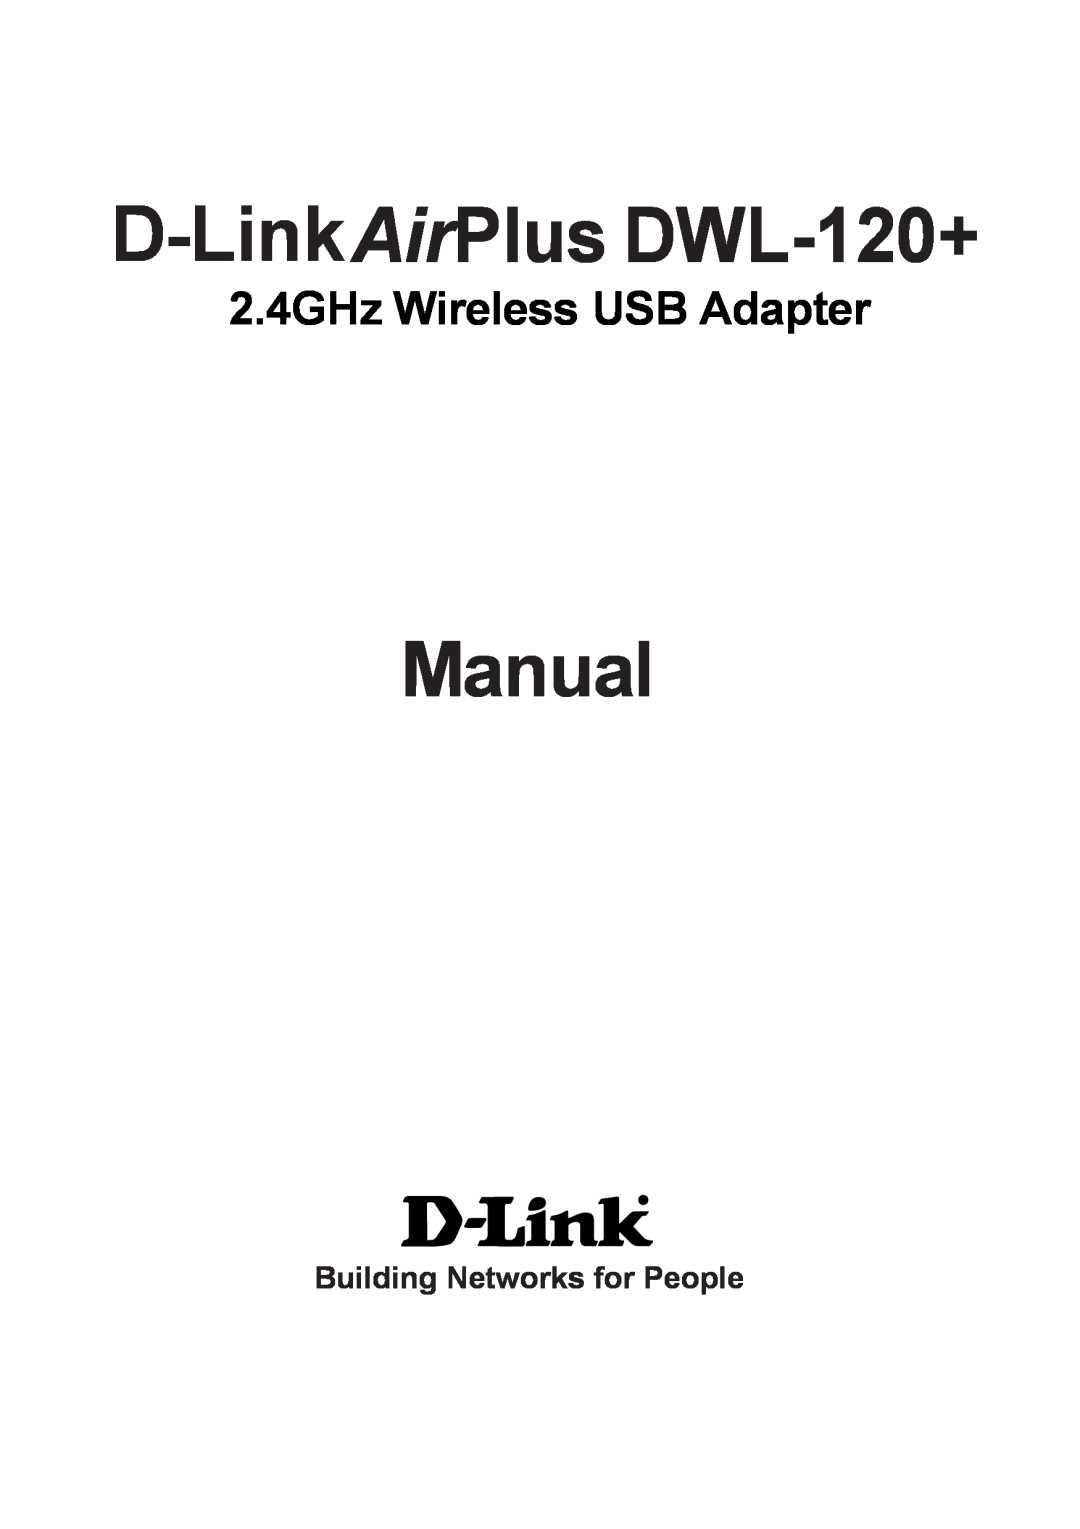 D-Link manual Building Networks for People, D-LinkAirPlus DWL-120+, Manual, 2.4GHz Wireless USB Adapter 